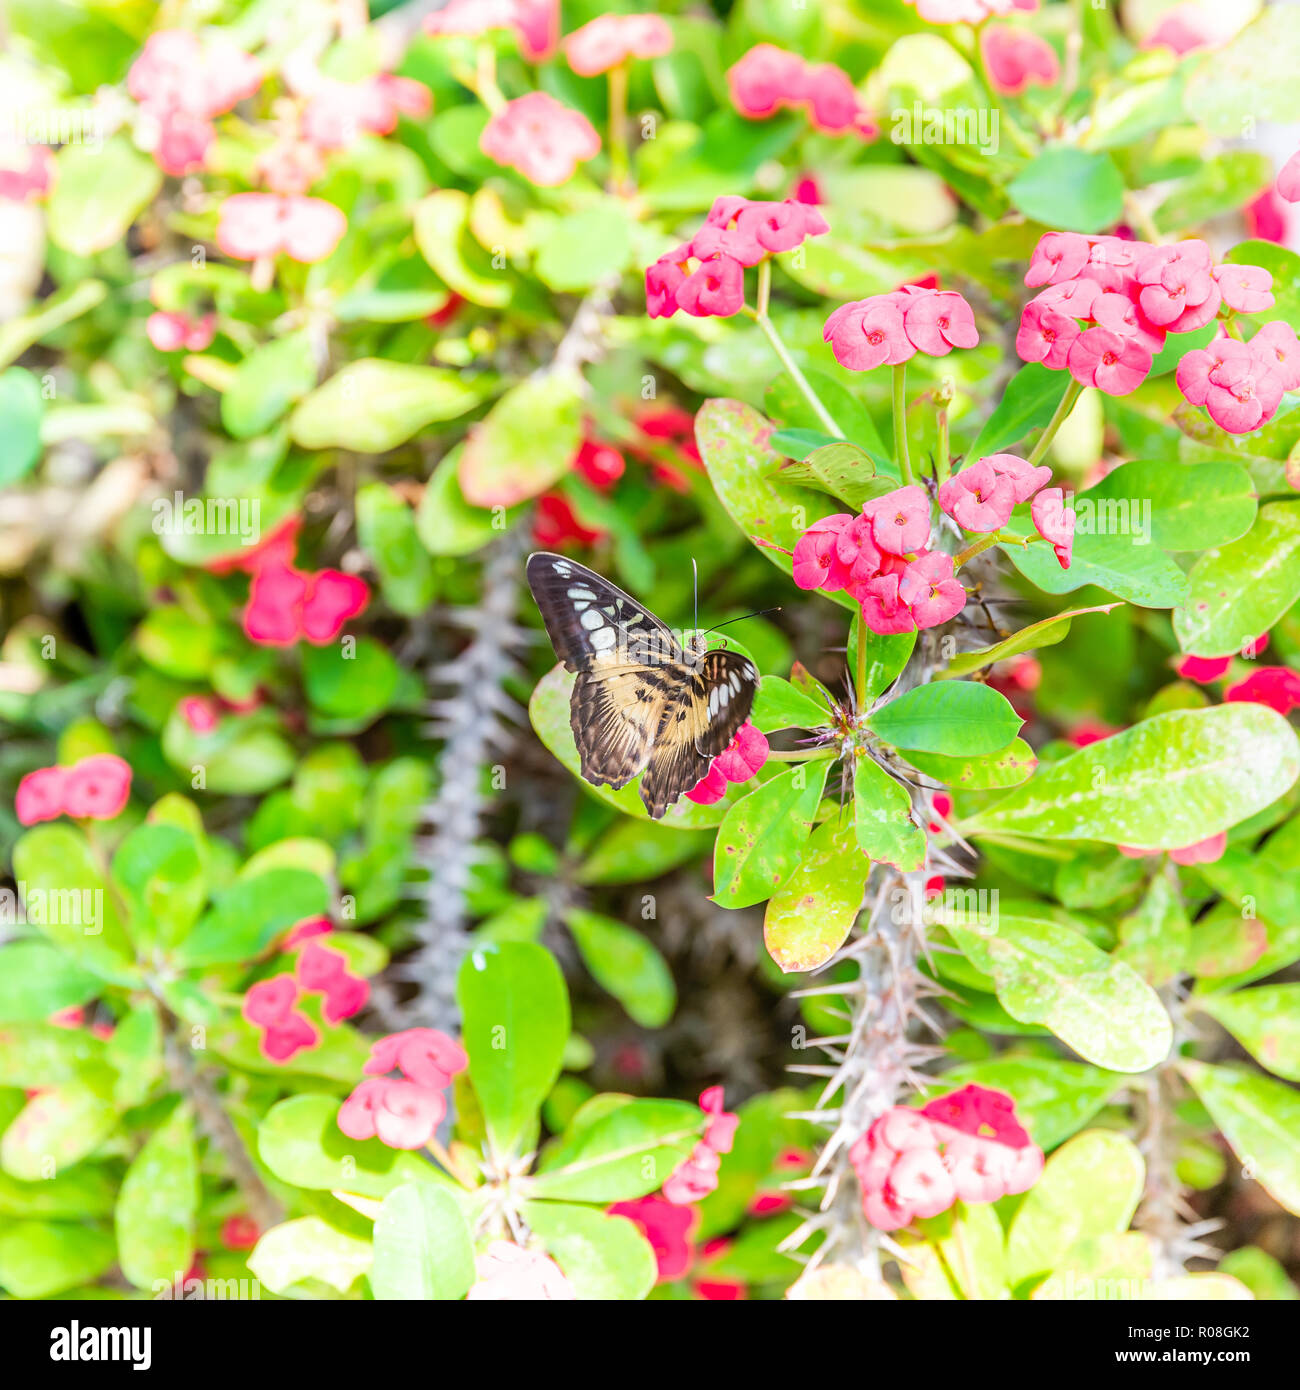 Square photo with colorful butterfly. Bug has nice wings with black and orange color. Insect is perched on plant or flower with pink blooms and many t Stock Photo